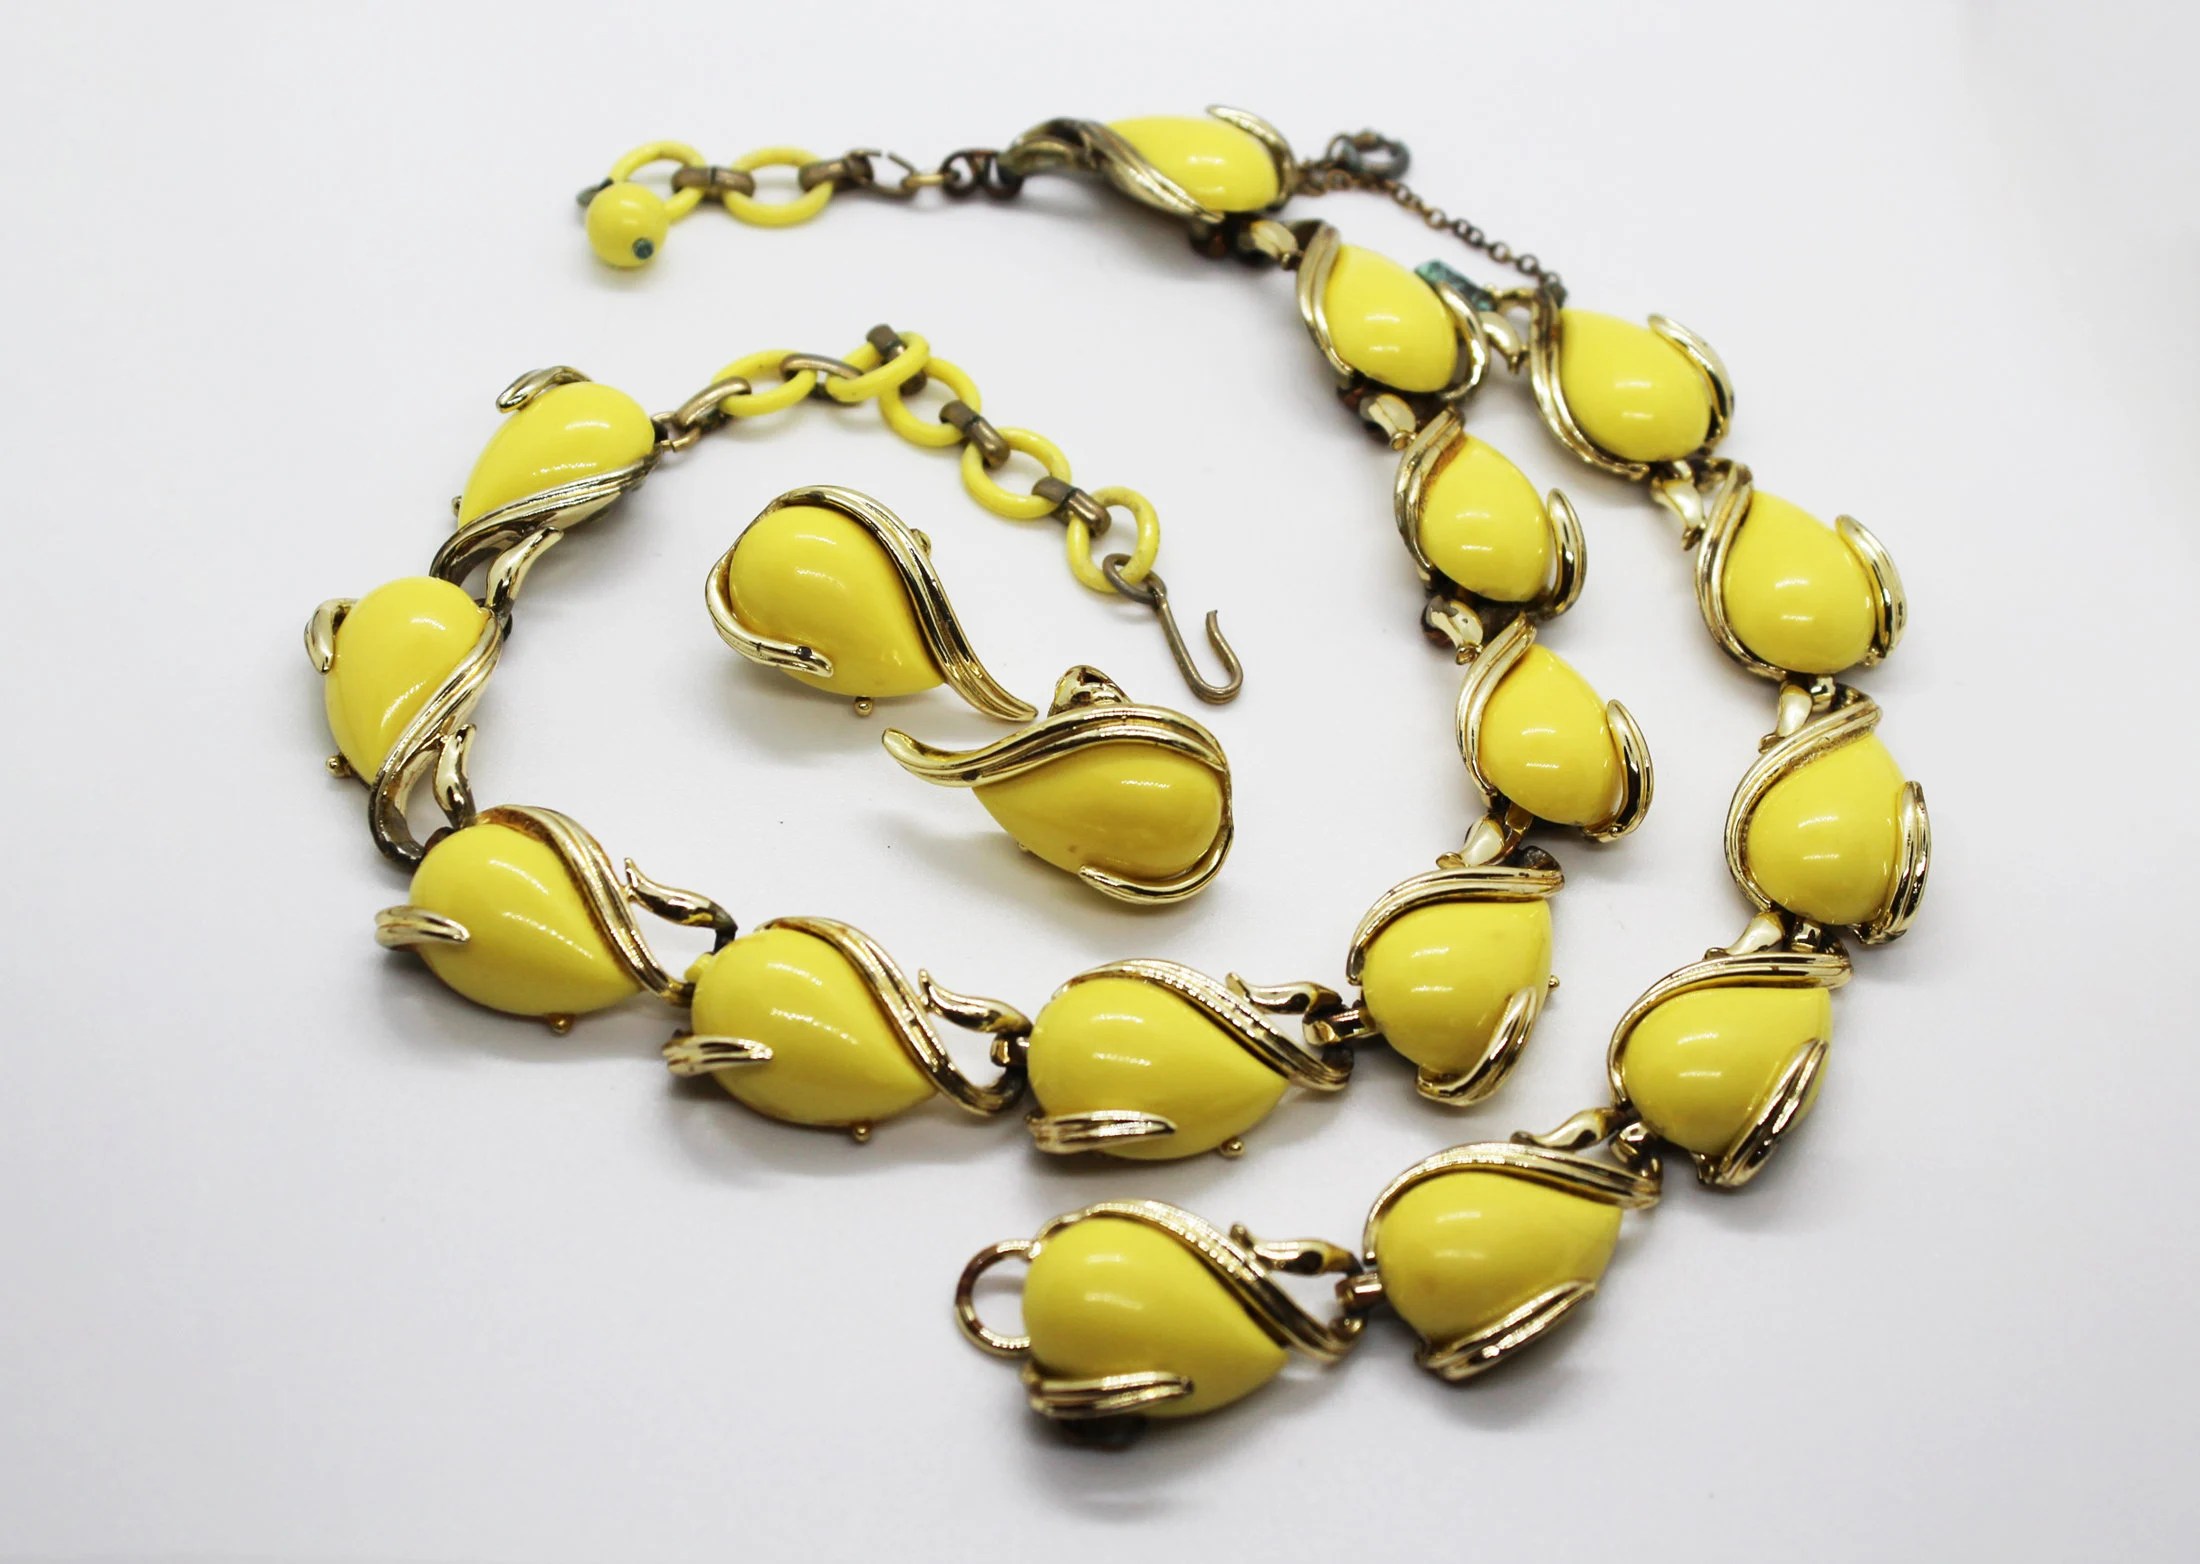 Coro Signed MCM Retro Yellow Lucite Jewelry Set - Necklace, Bracelet, Earrings – Vintage Bold Statement Mid Century Costume - USA Ships Free